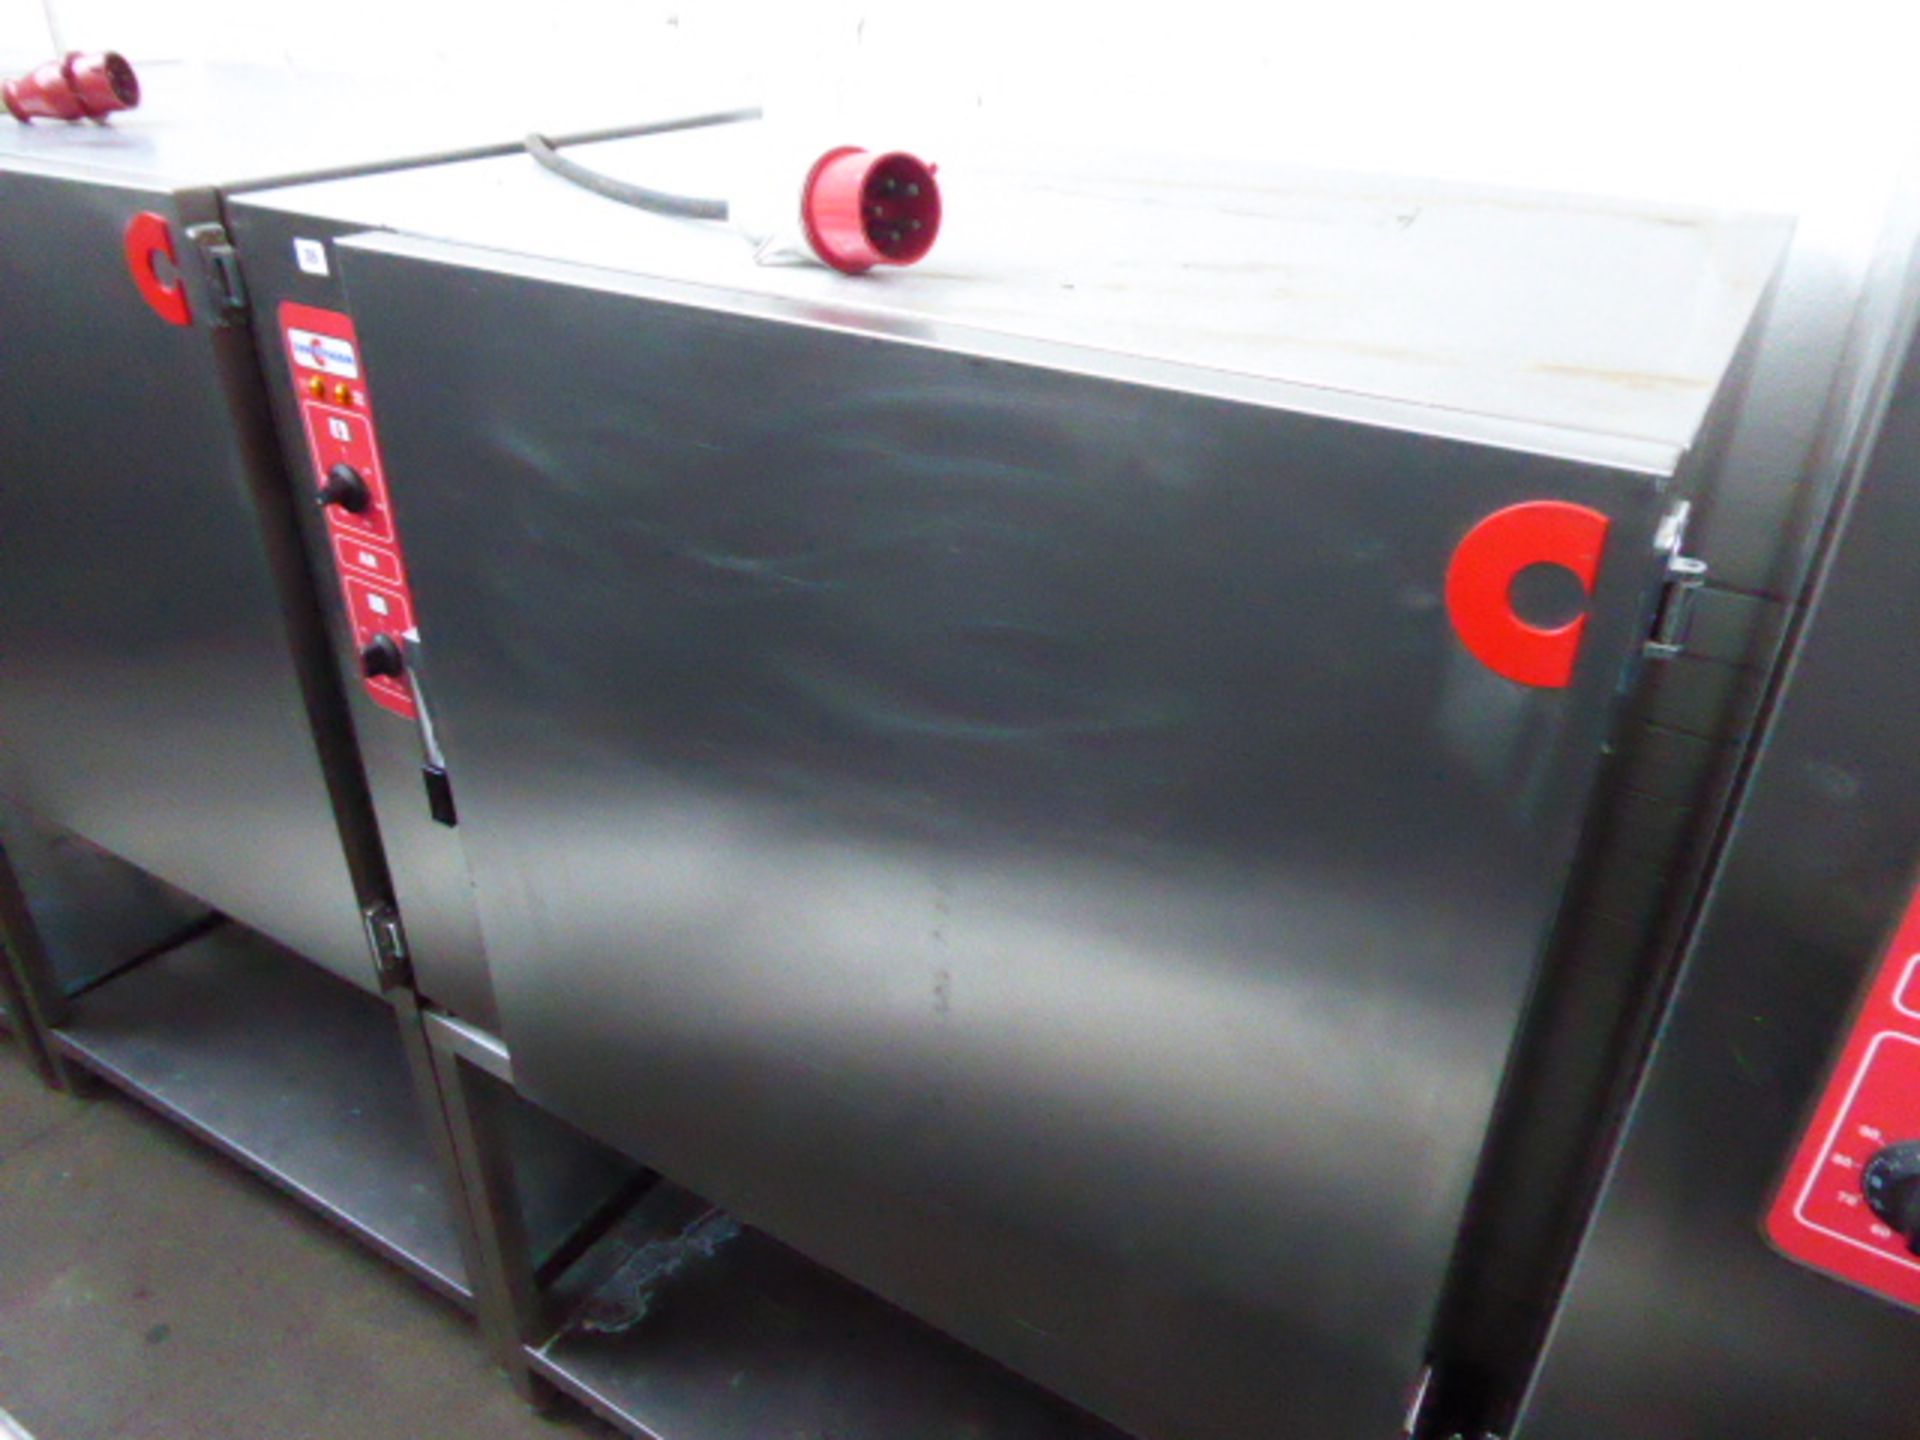 102cm Convotherm regeneration oven with 9 trays 3 phase